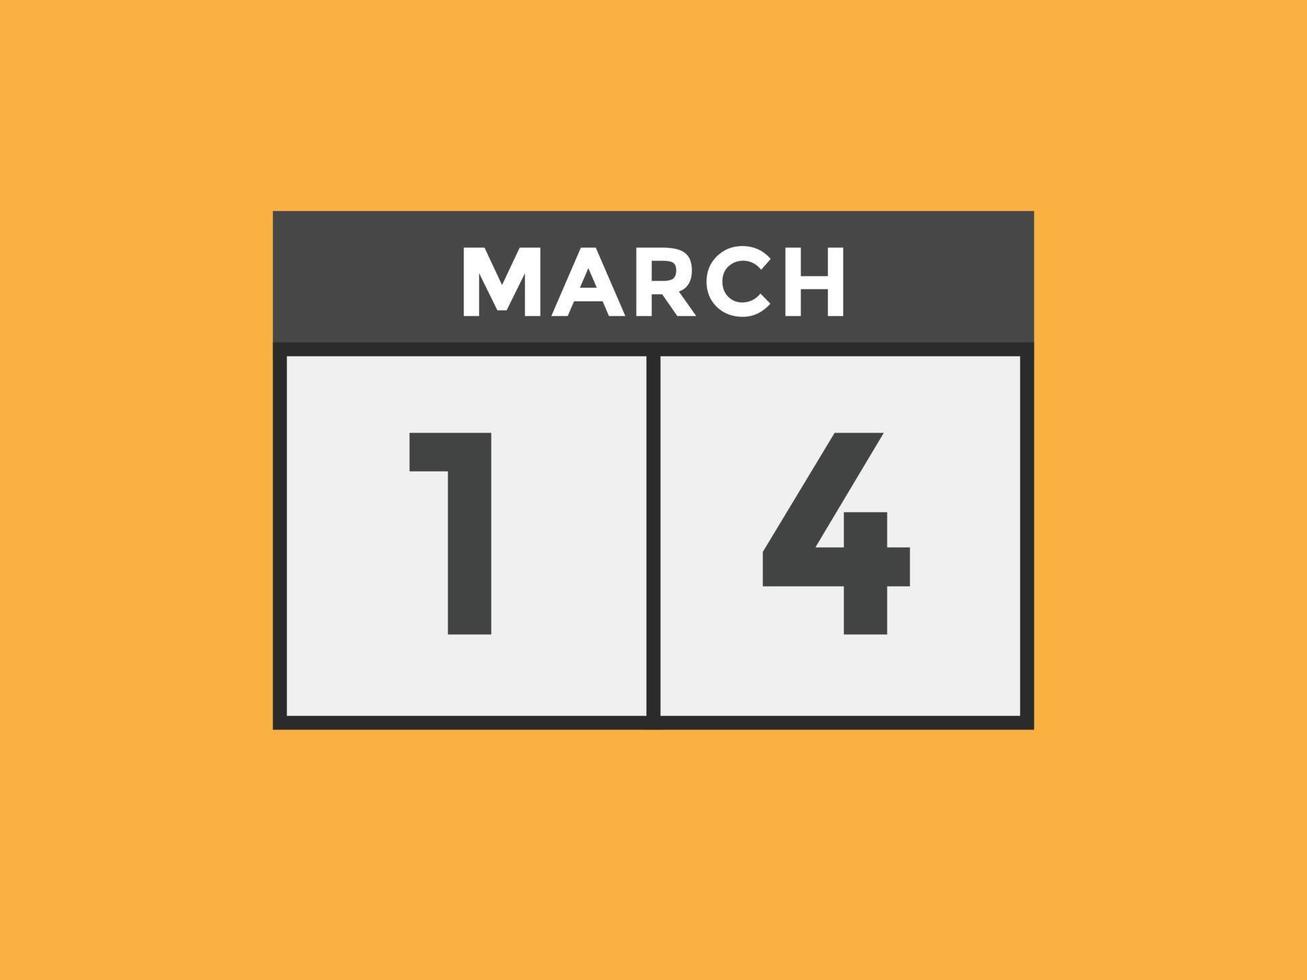 march 14 calendar reminder. 14th march daily calendar icon template. Calendar 14th march icon Design template. Vector illustration